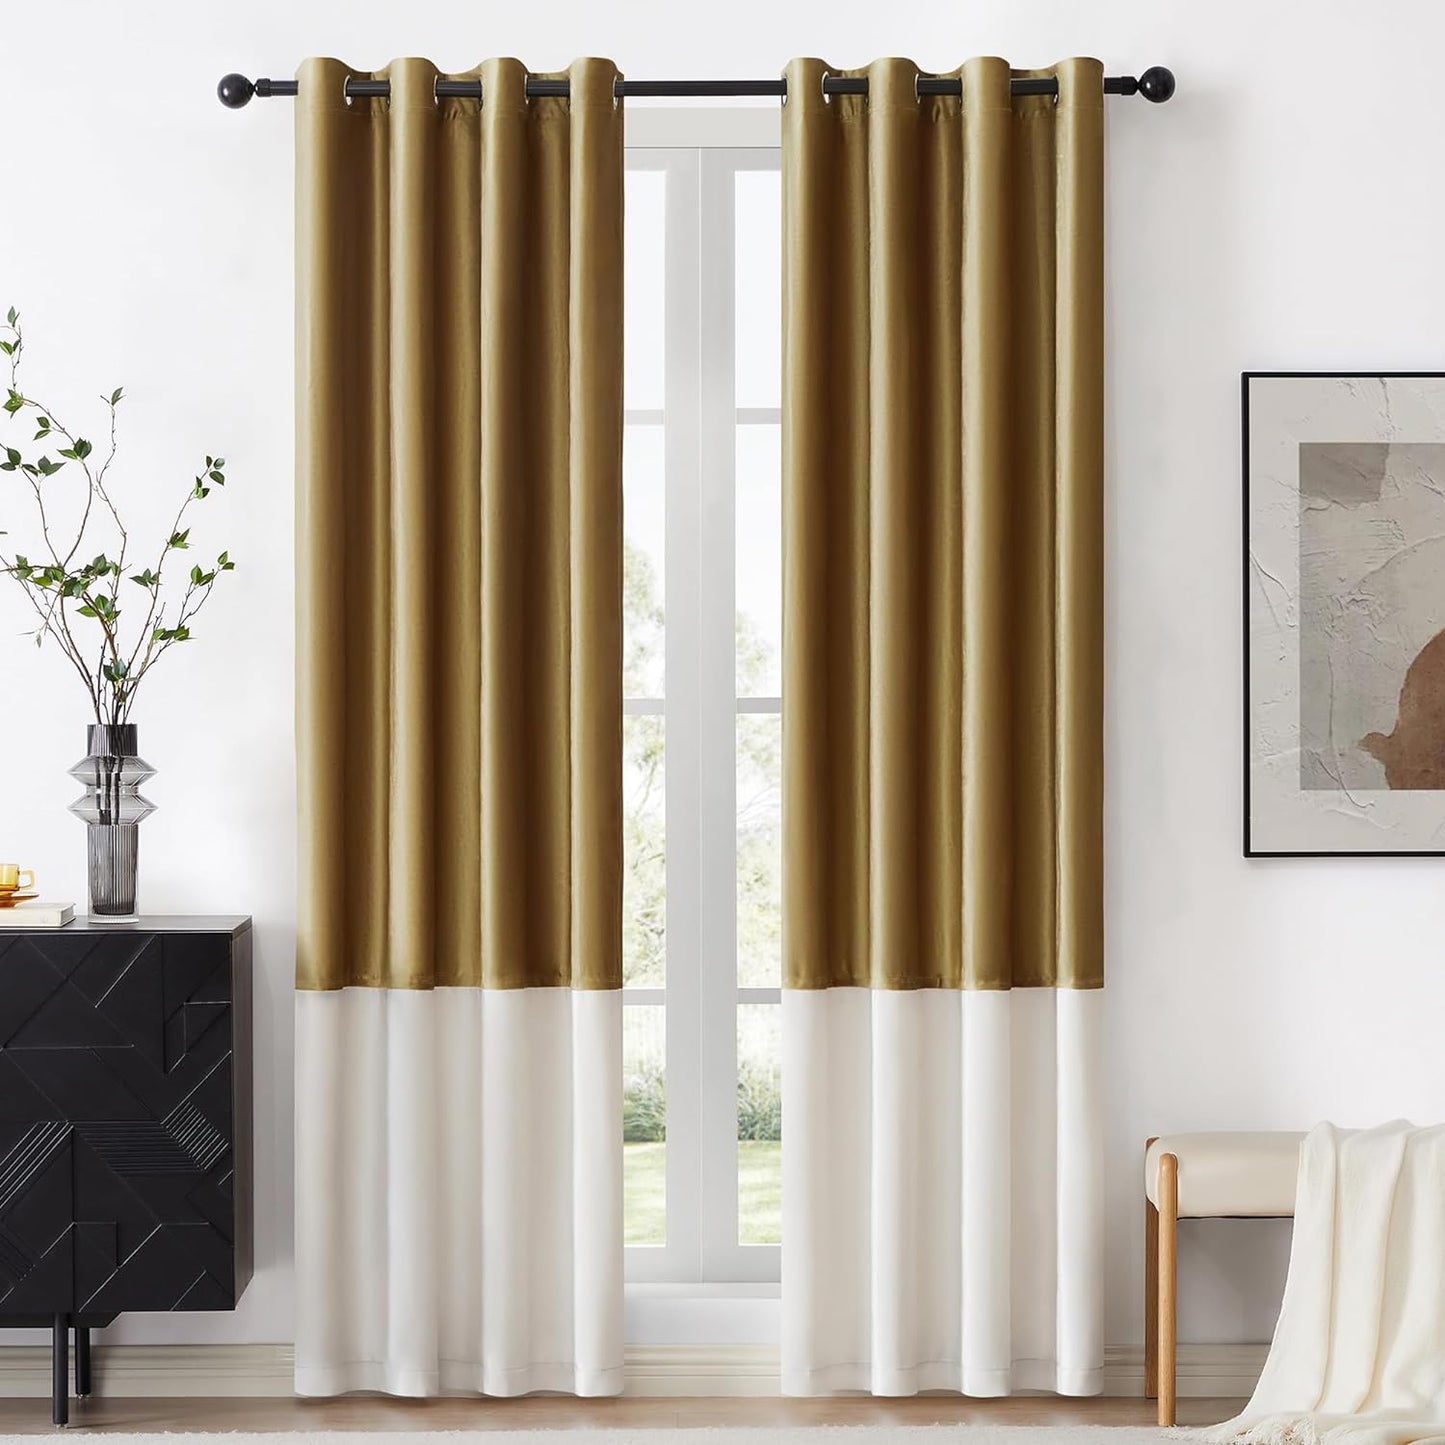 BULBUL Color Block Window Curtains Panels 84 Inches Long Cream Ivory Gold Velvet Farmhouse Drapes for Bedroom Living Room Darkening Treatment with Grommet Set of 2  BULBUL Gold  Cream 52"W X 84"L 